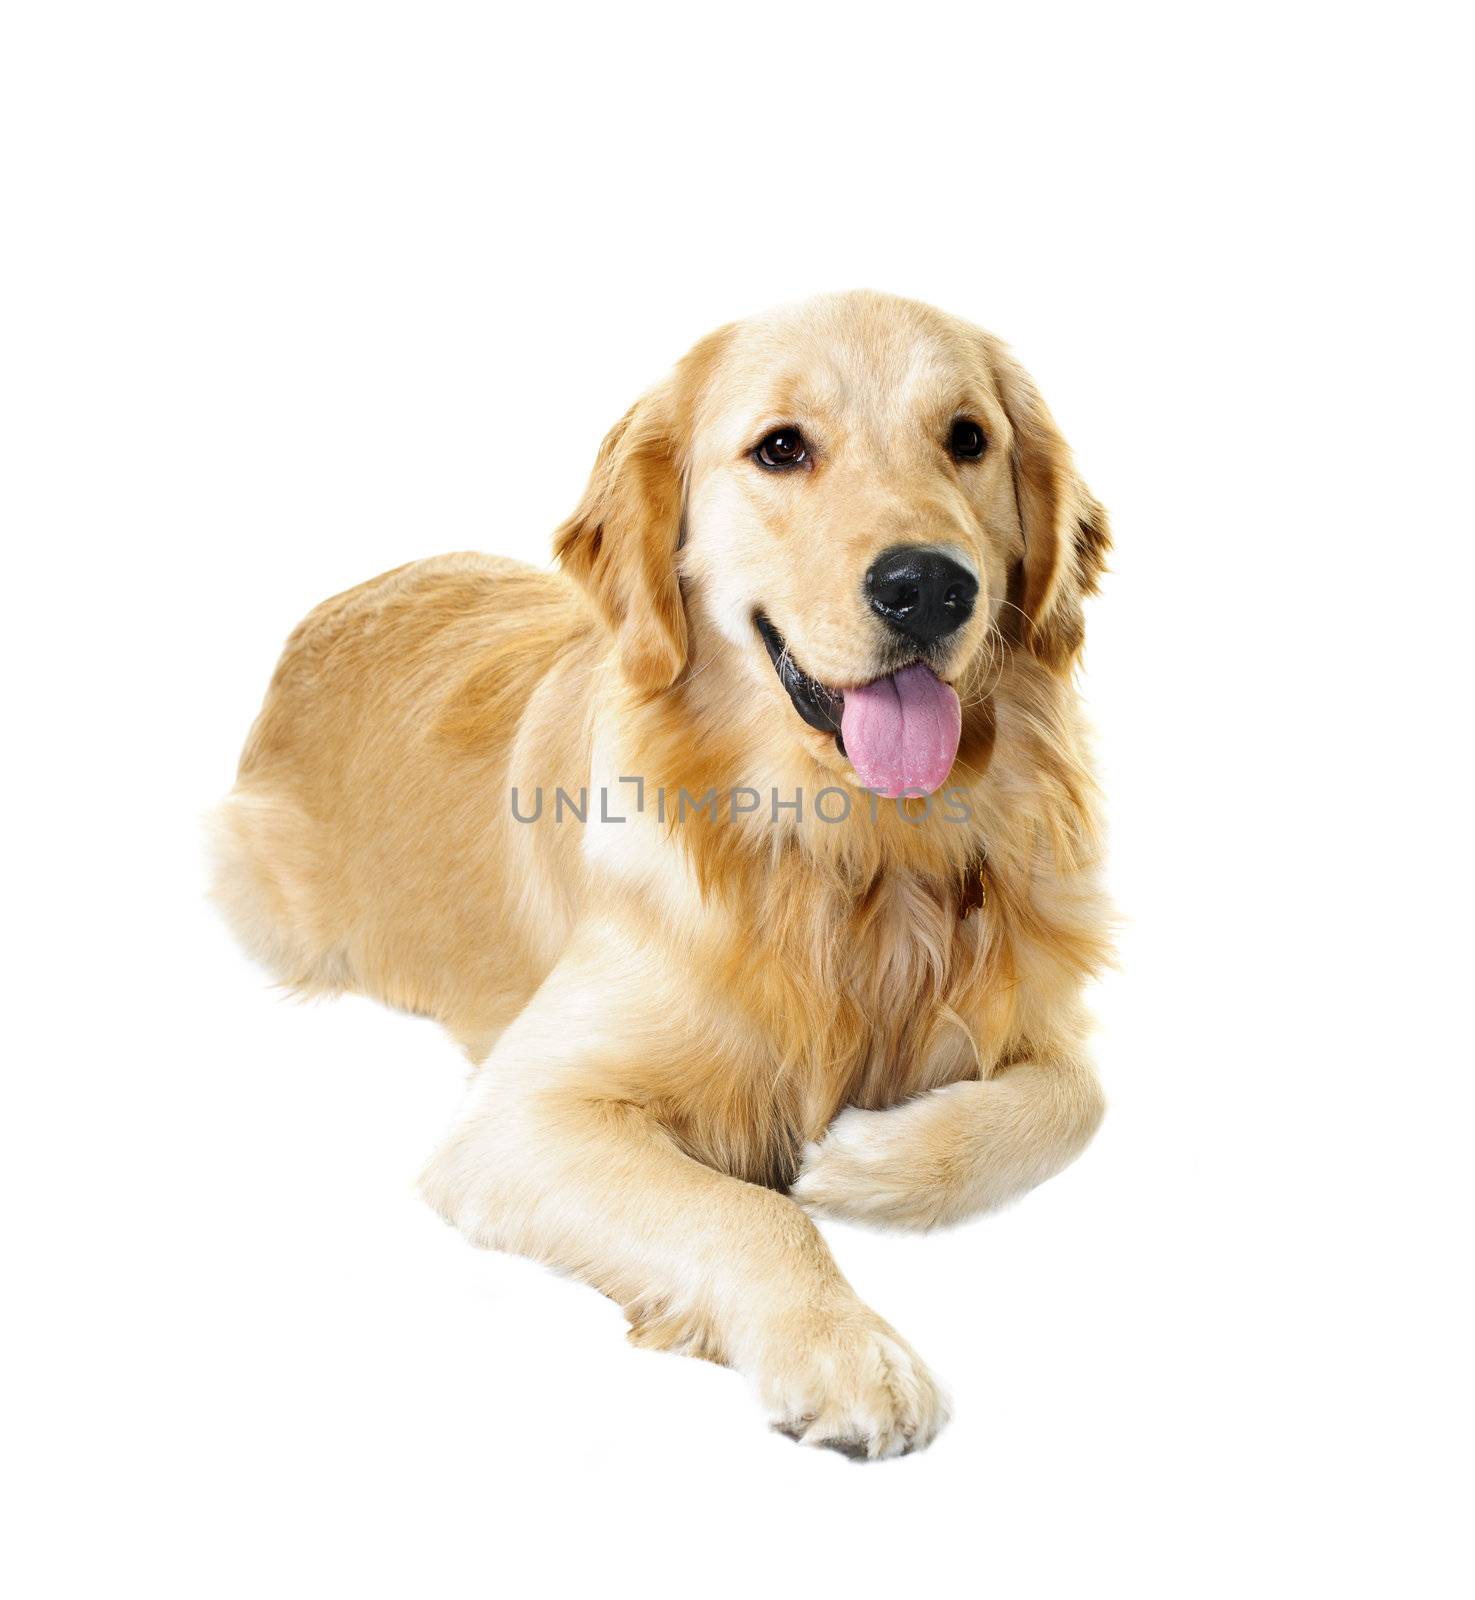 Golden retriever pet dog laying down isolated on white background